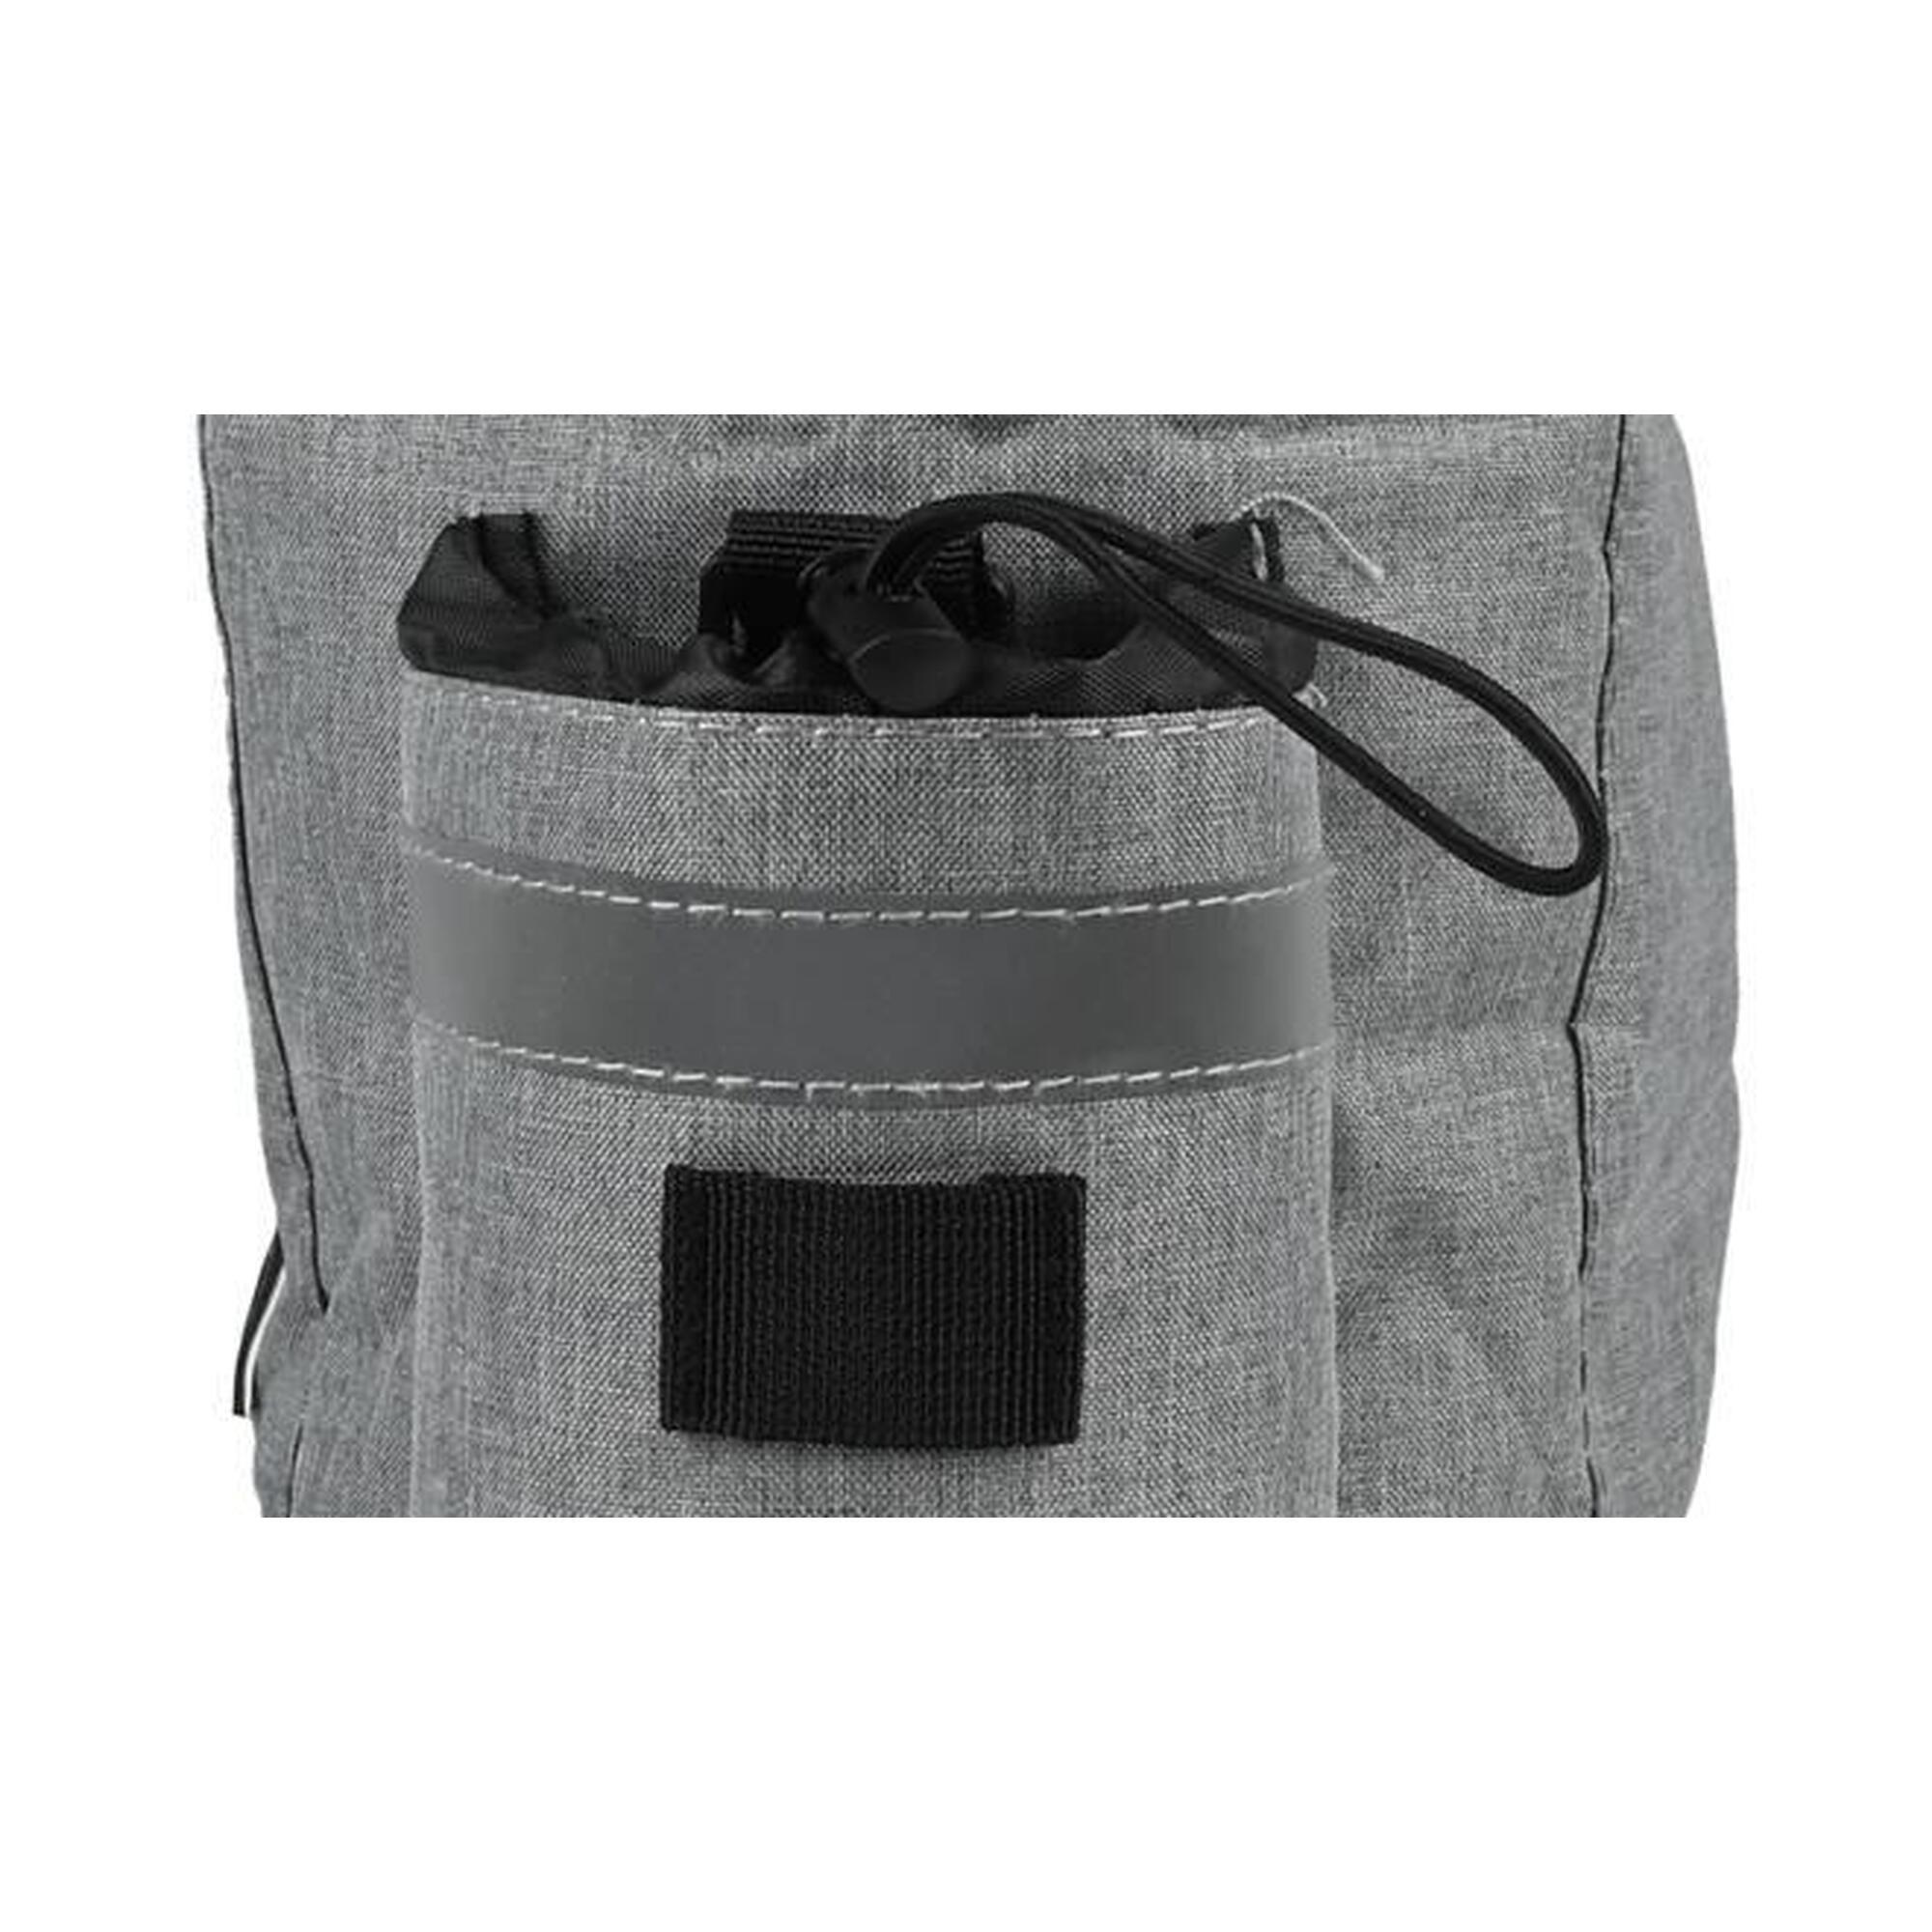 Sac isotherme pour bagages simples 7 litres Gris